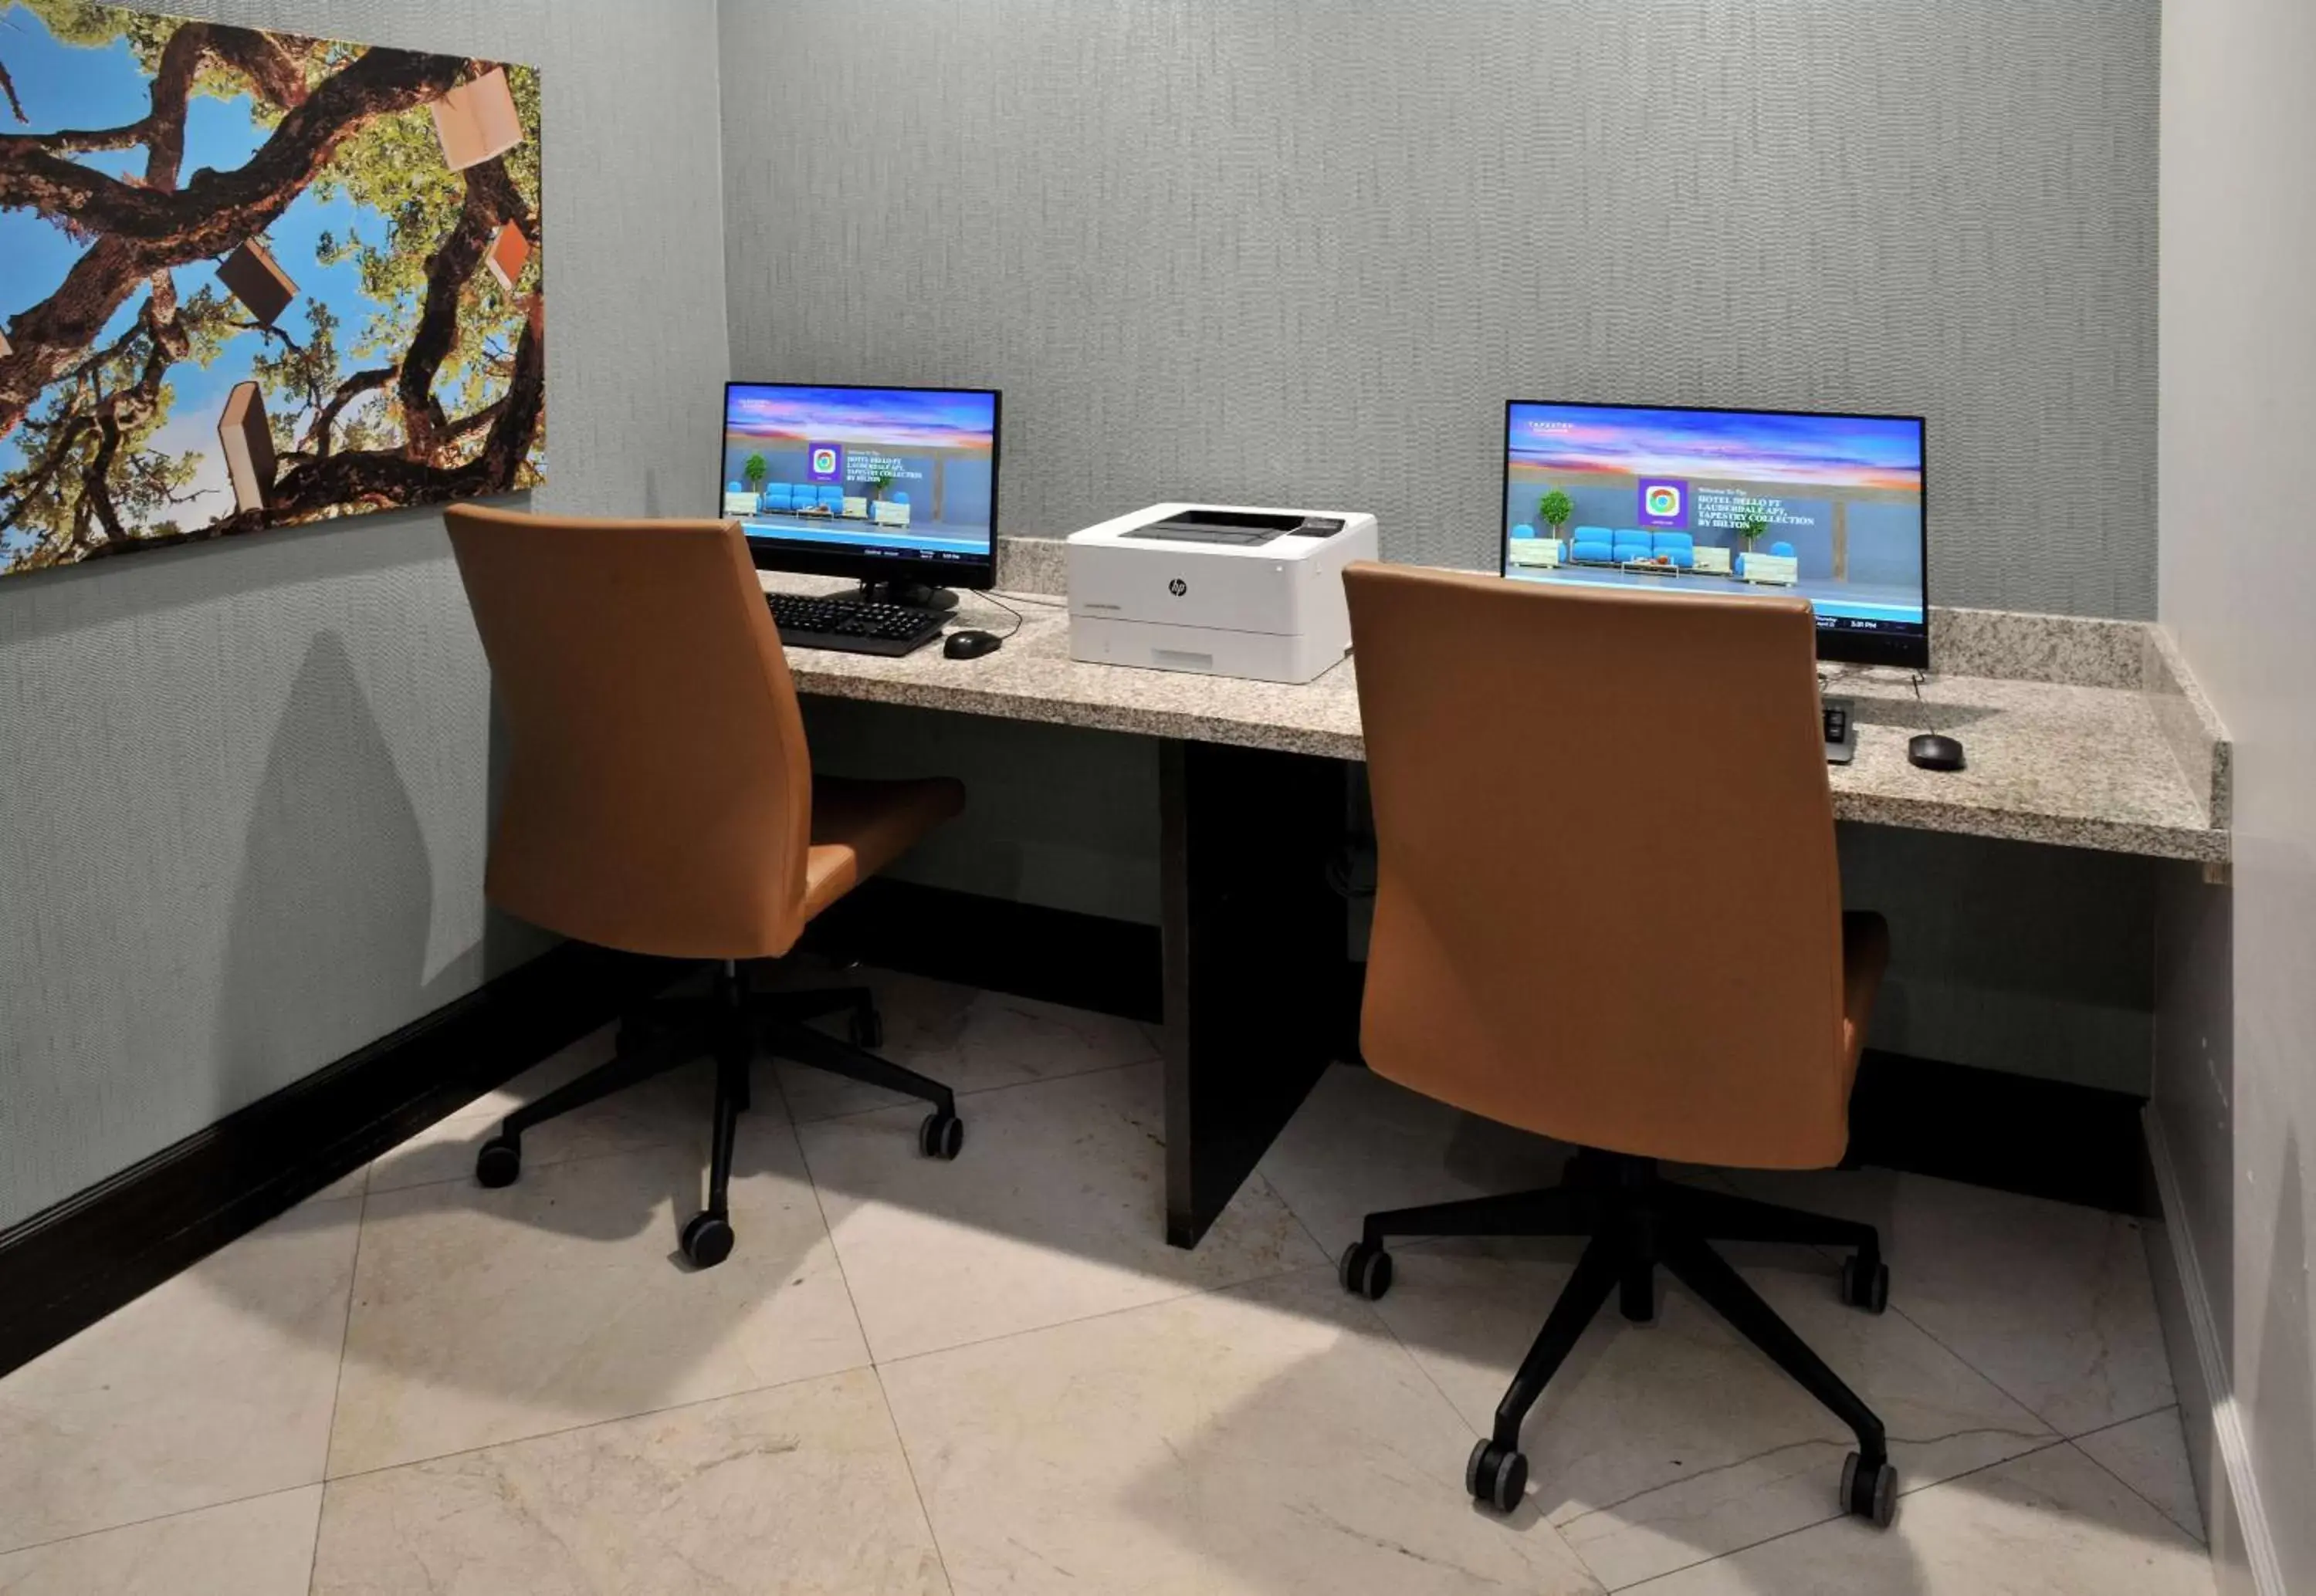 Business facilities in Hotel Dello Ft Lauderdale Airport, Tapestry Collection by Hilton